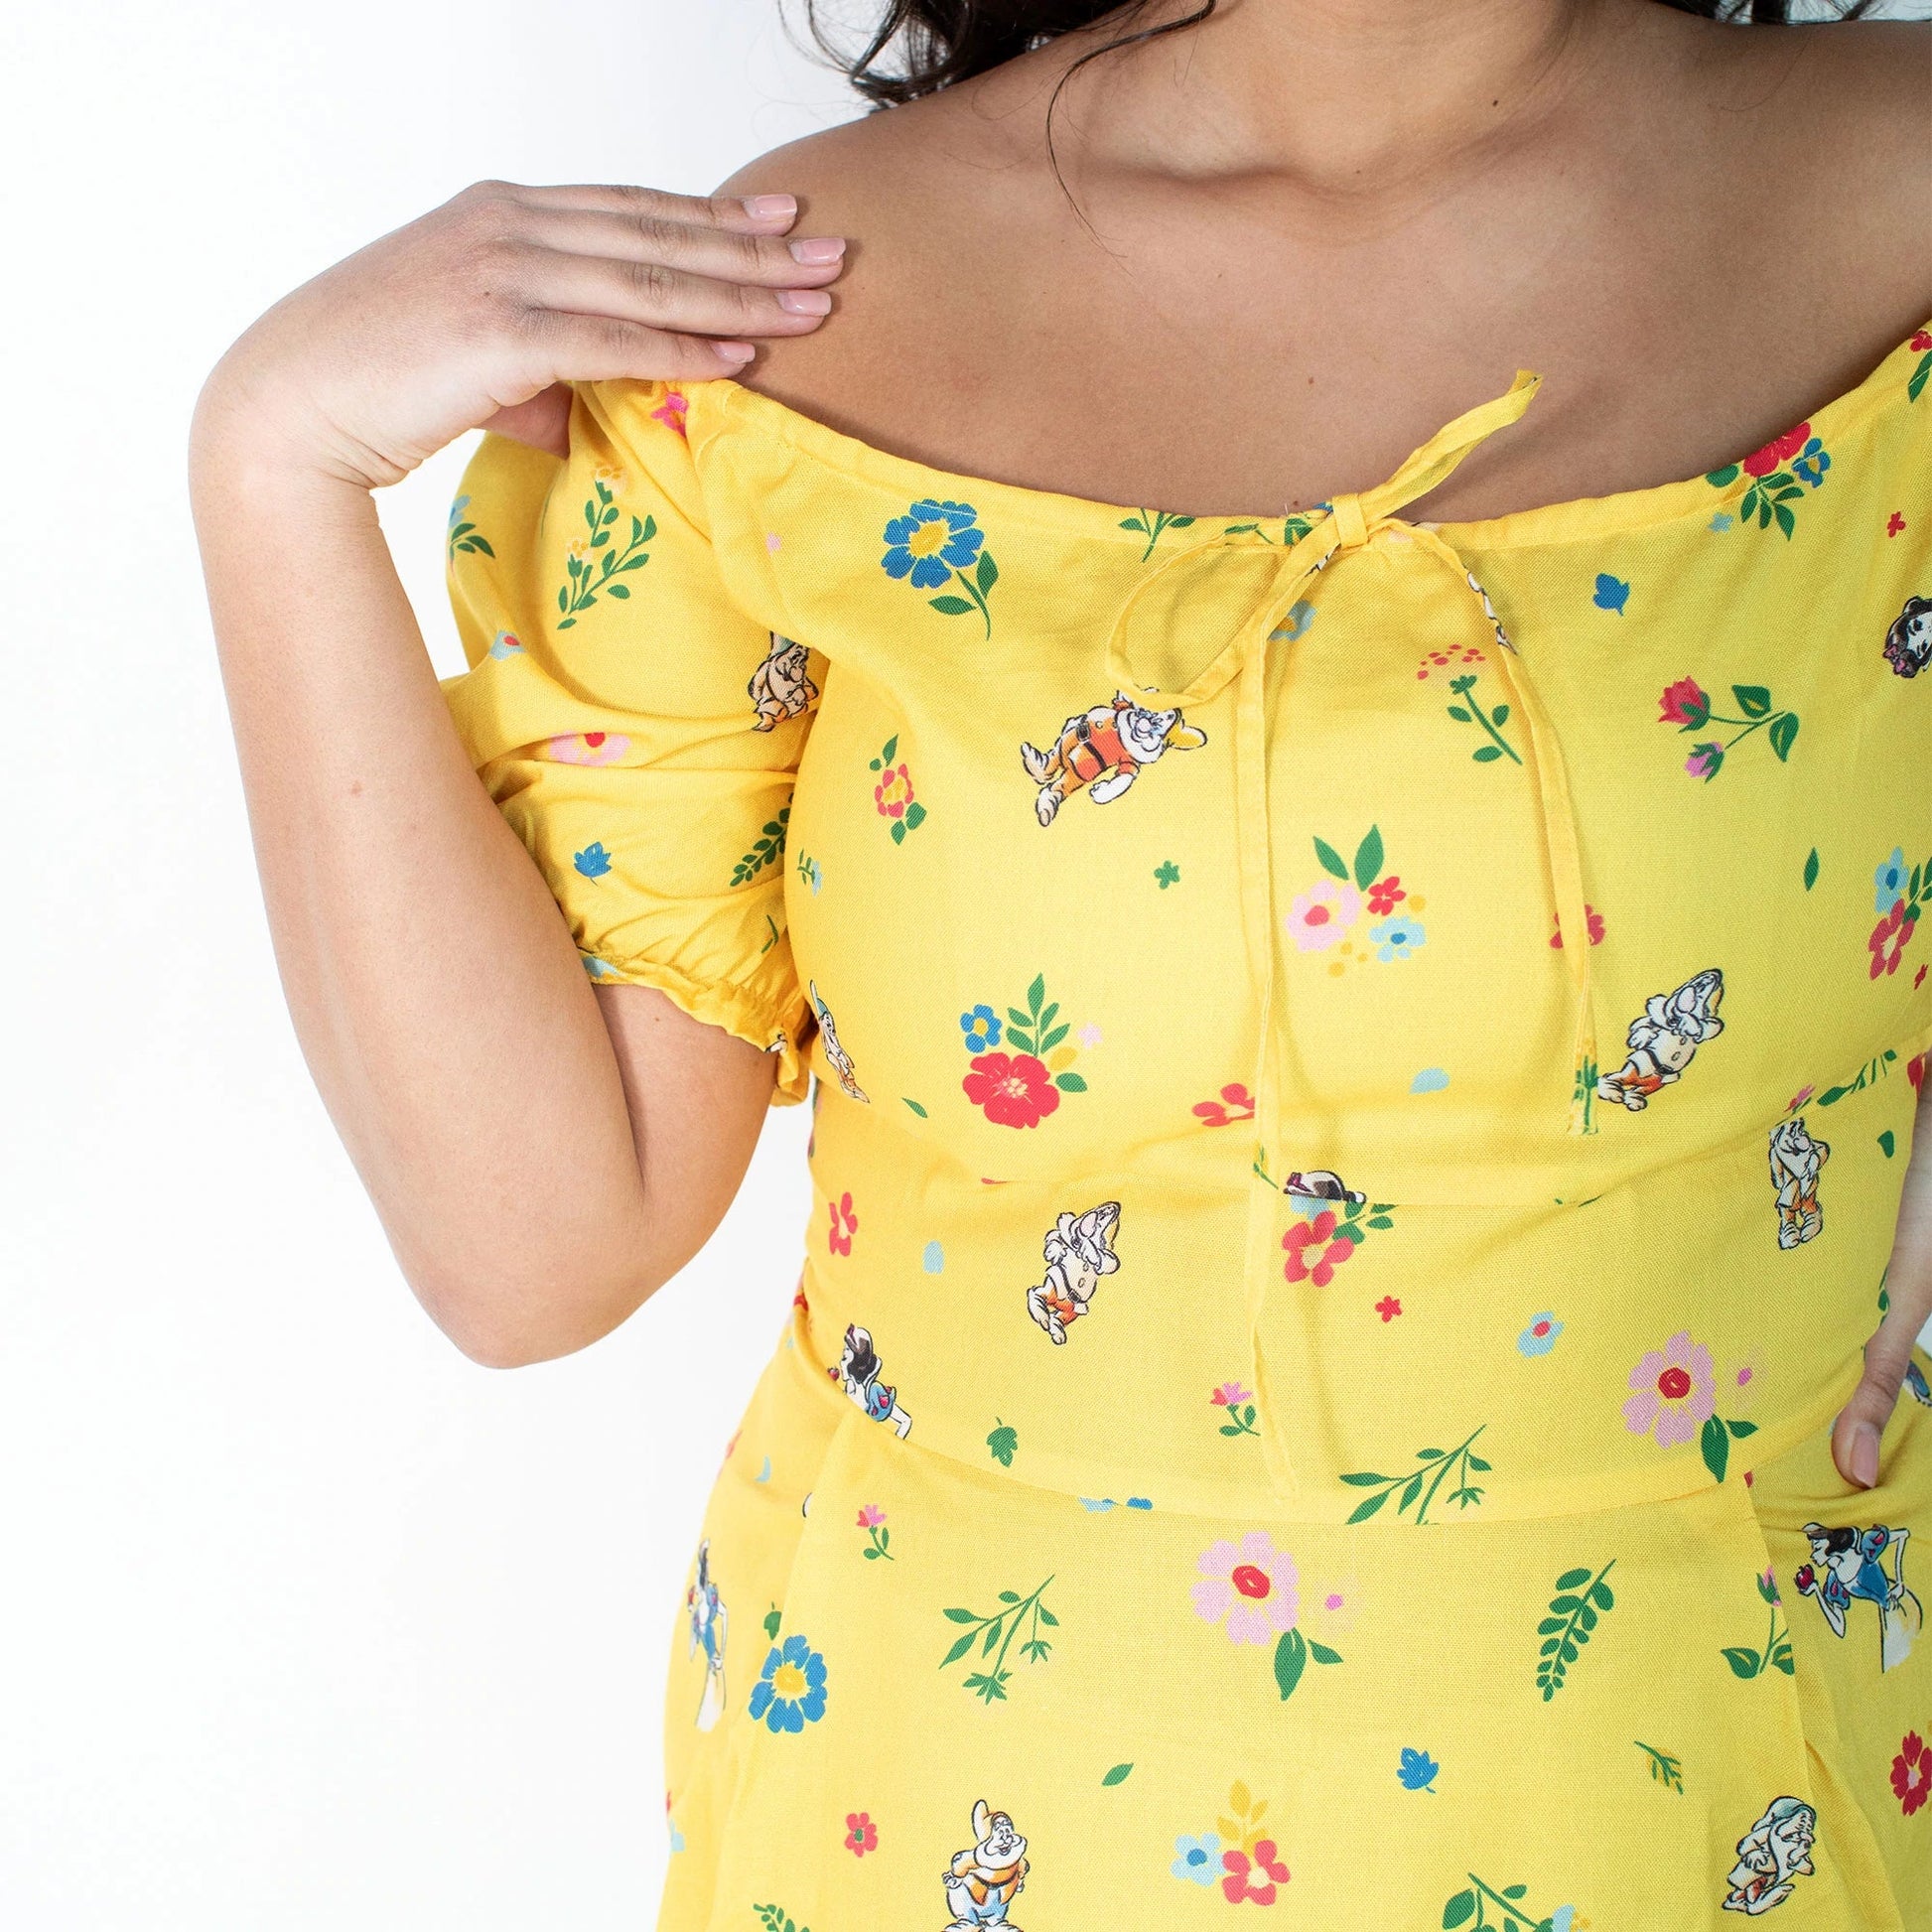 Snow White Puffy Sleeve Dress - Rockamilly-Tops-Vintage